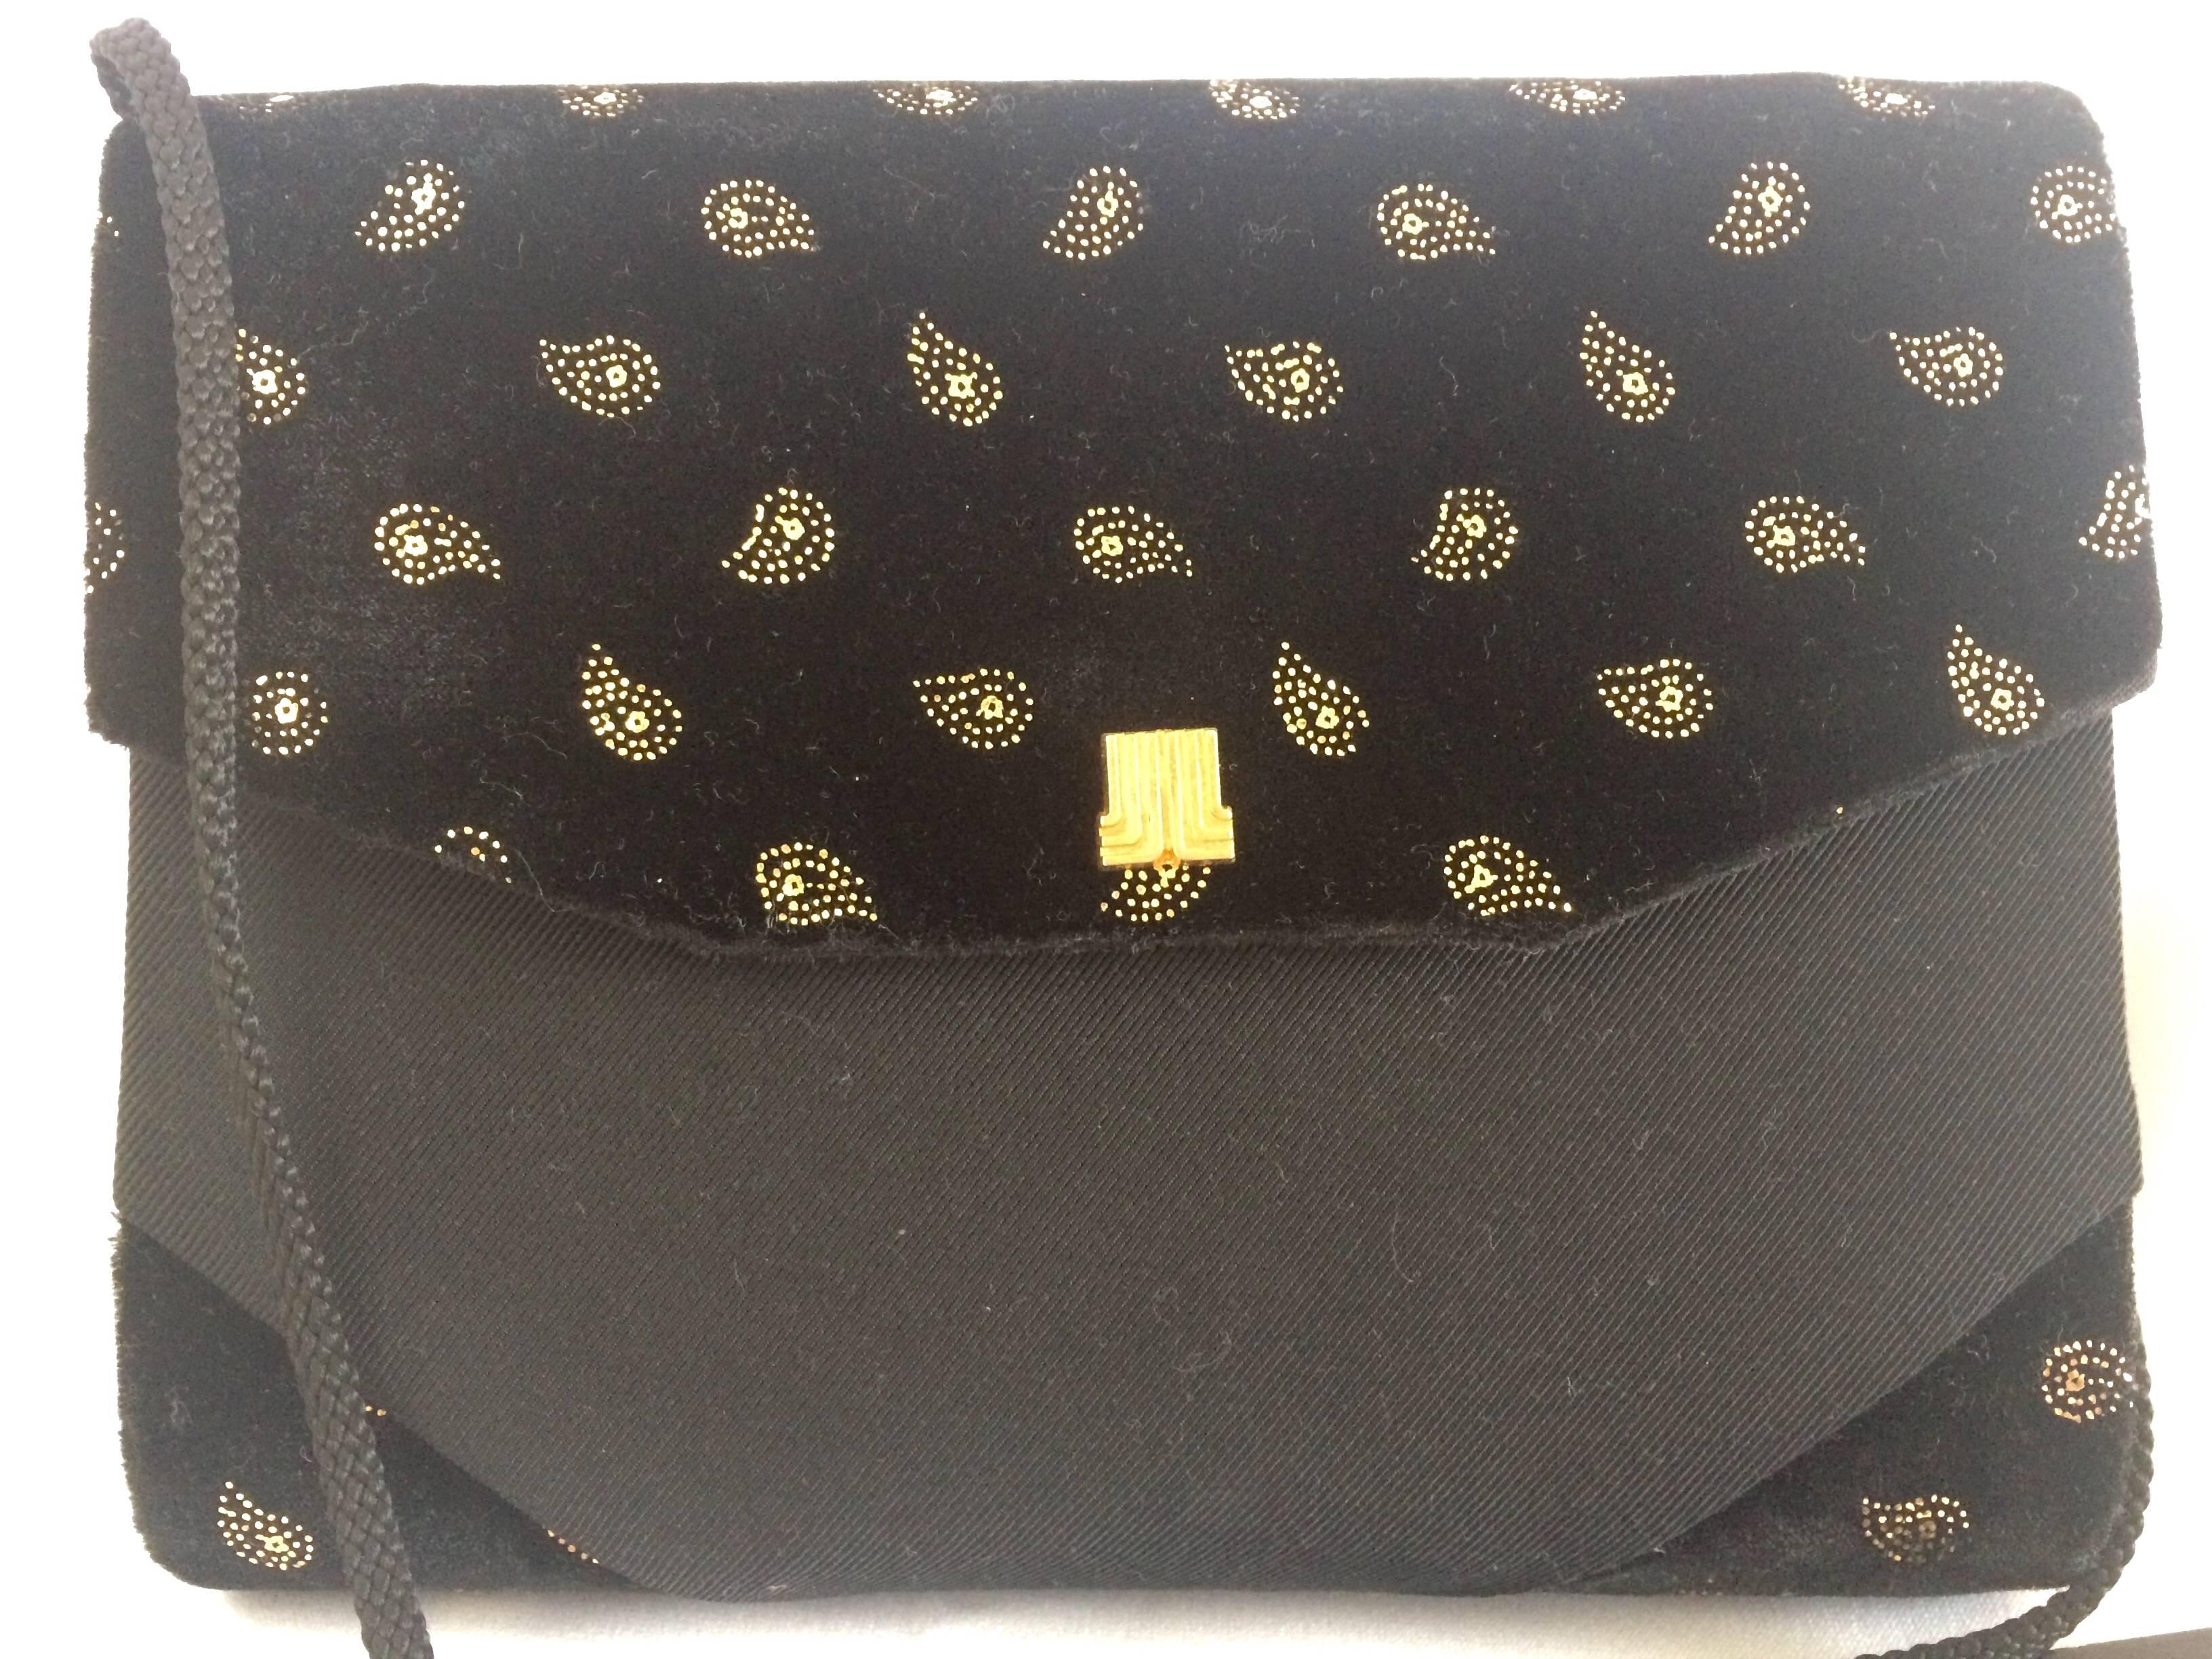 1980s. Vintage LANVIN black velvet and fabric clutch shoulder bag with golden allover paisley prints.

Introducing a vintage LANVIN clutch shoulder bag back in the 80's.
Featuring its iconic golden logo motif on the flap.

Golden mini paisley prints